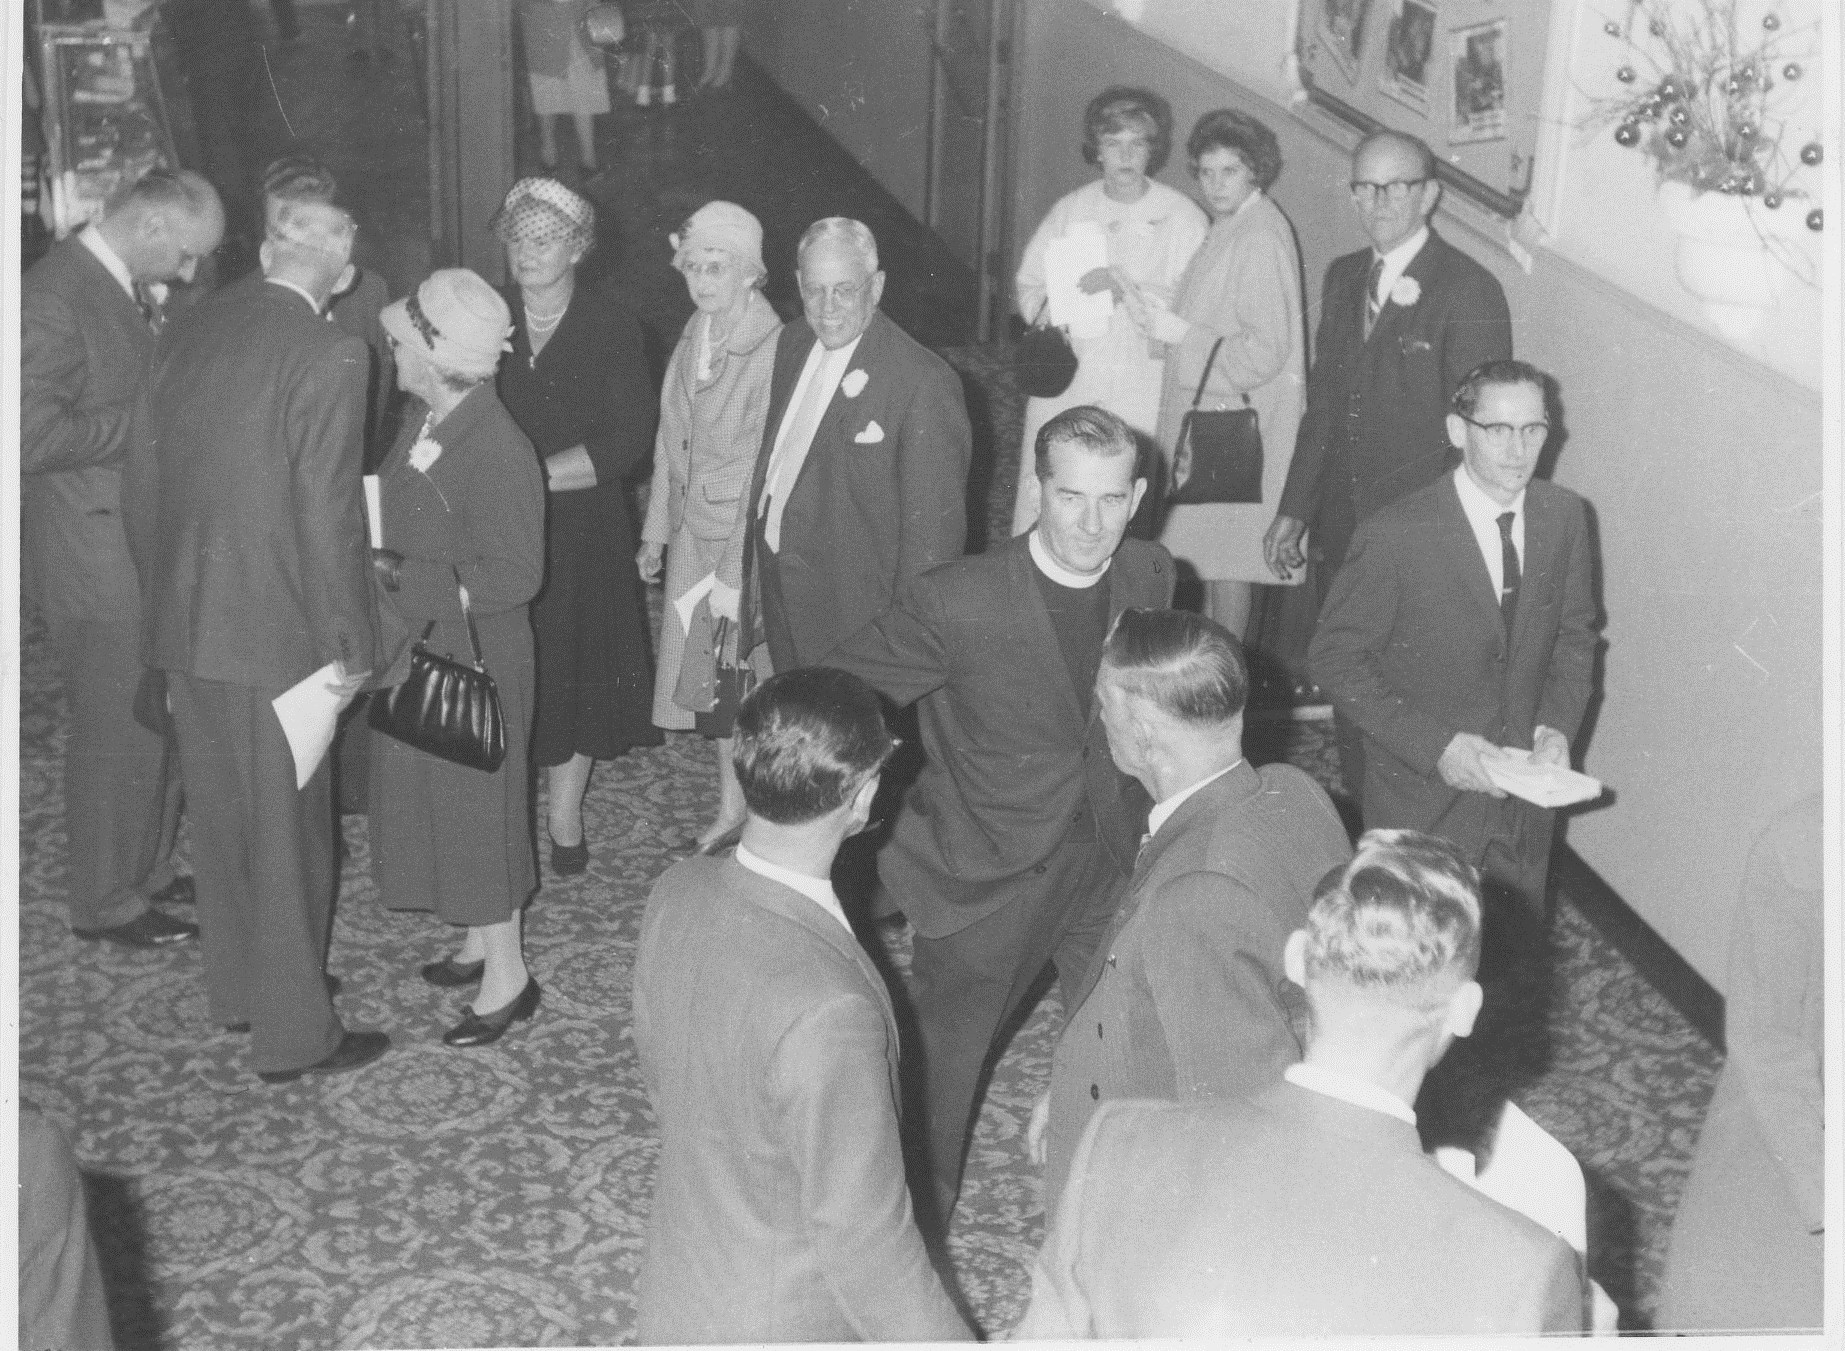 MaughanChurchServiceMajesticTheatre12May1963(2)